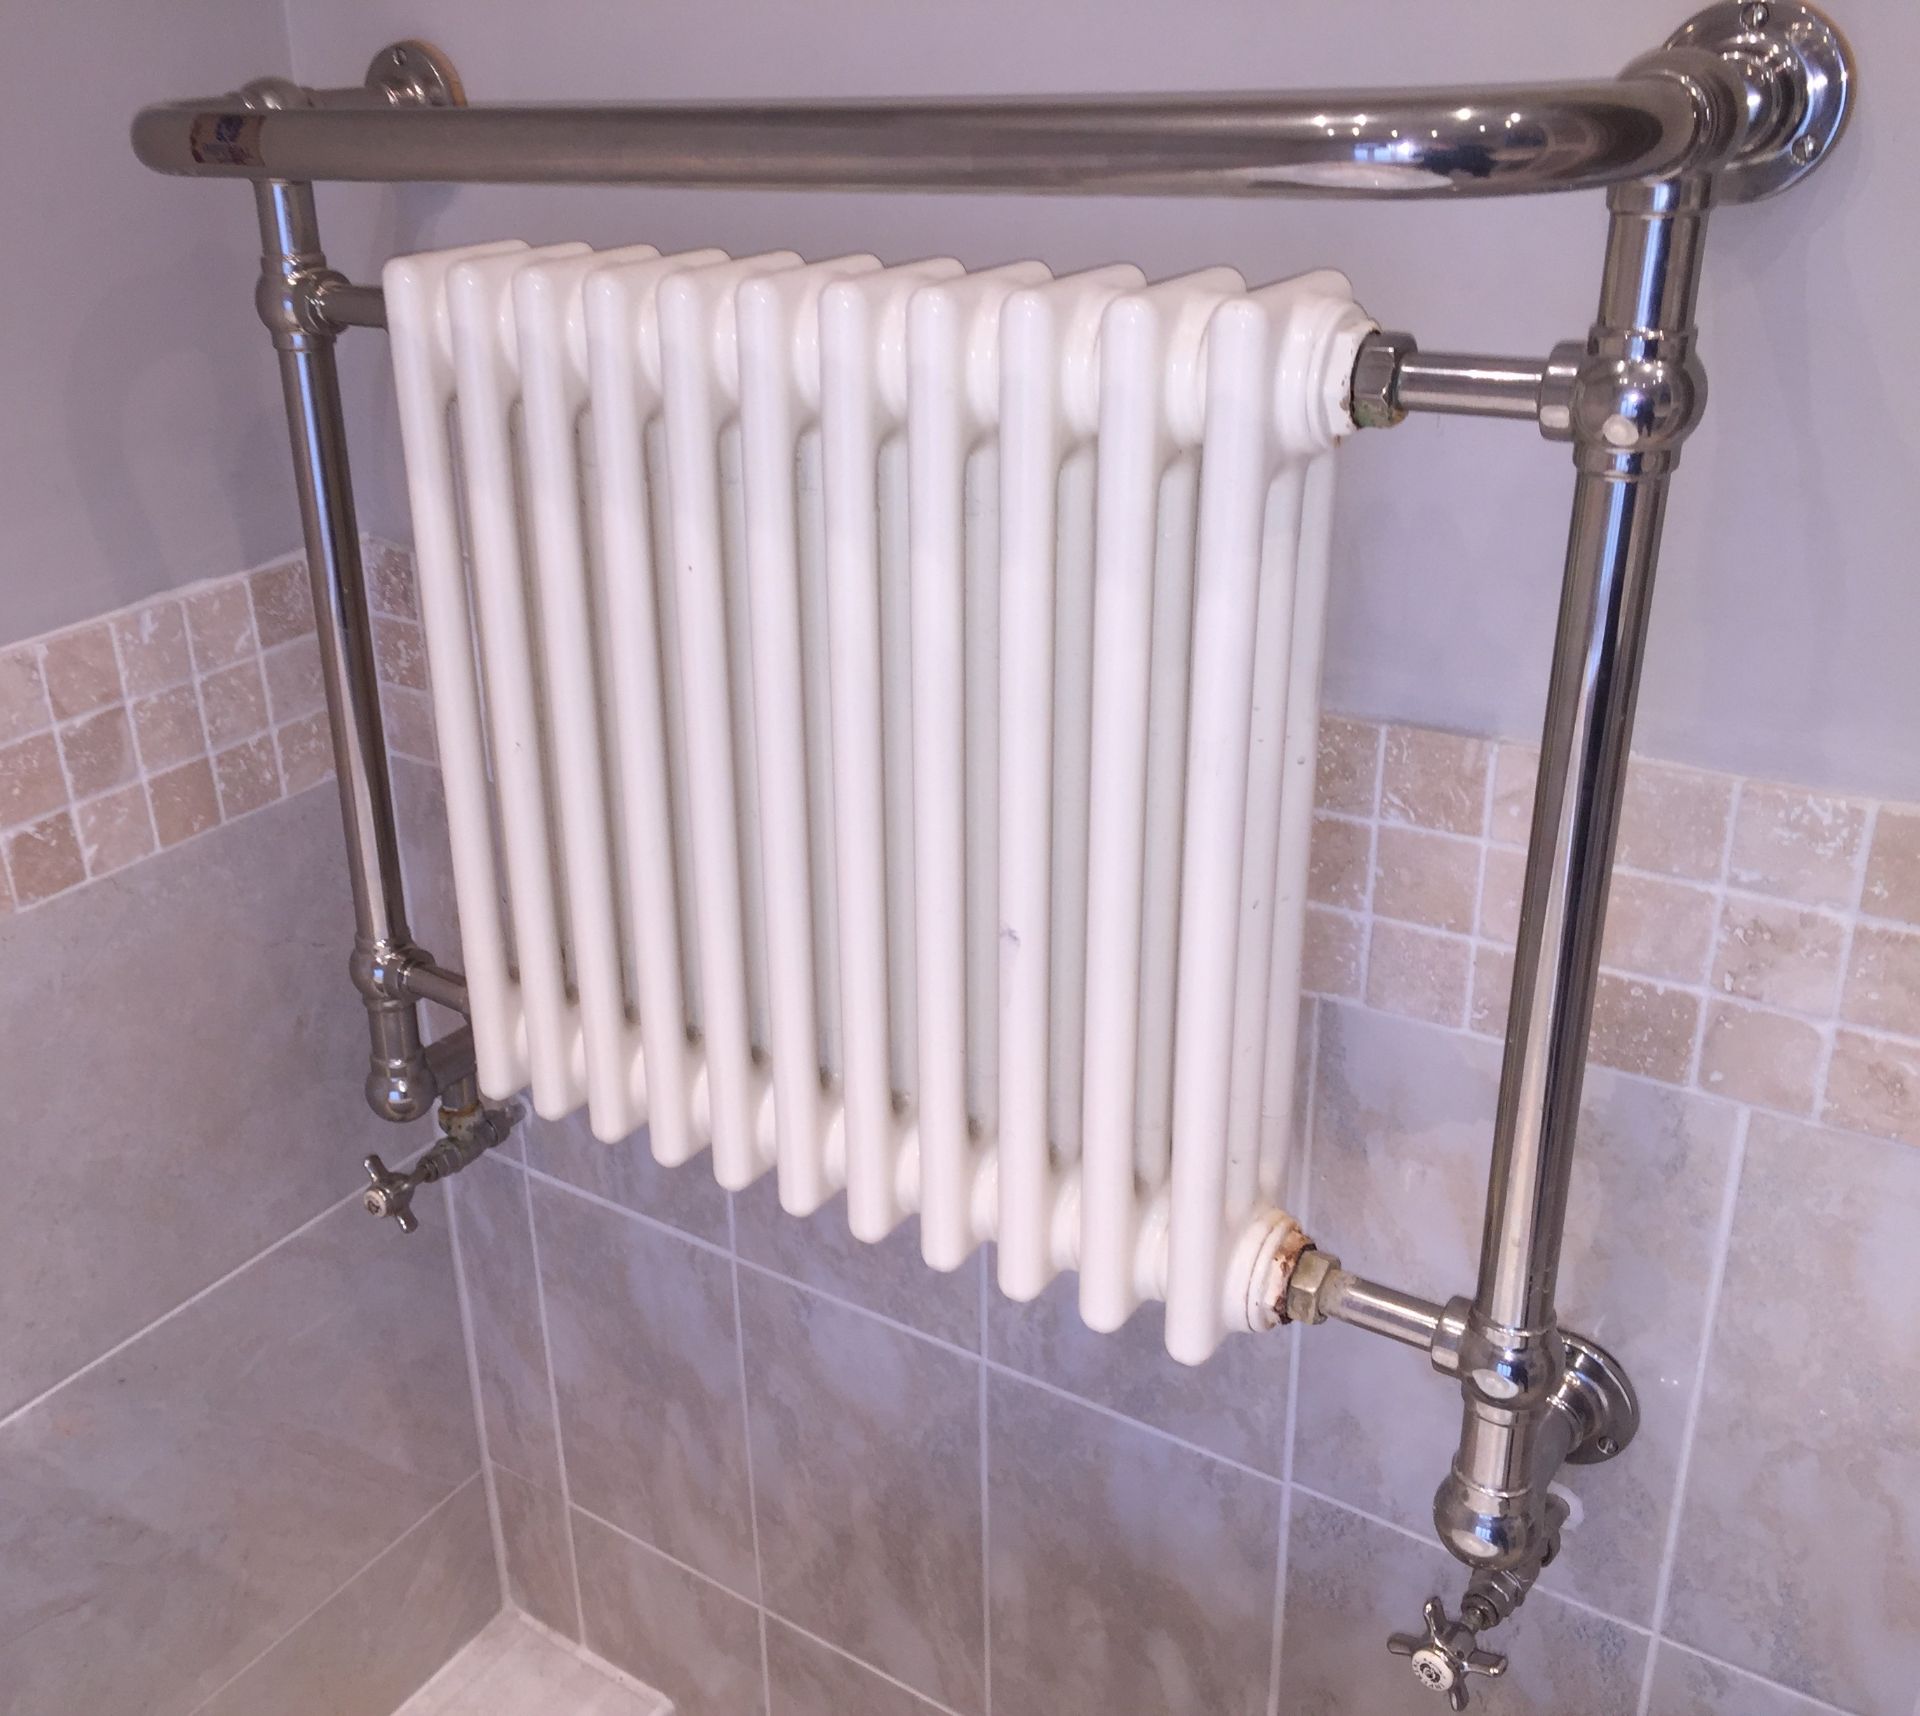 2 x Matching Radiators - Dimensions Width 80cm x Height 74cm x Depth 25cm - Preowned In Good - Image 3 of 6